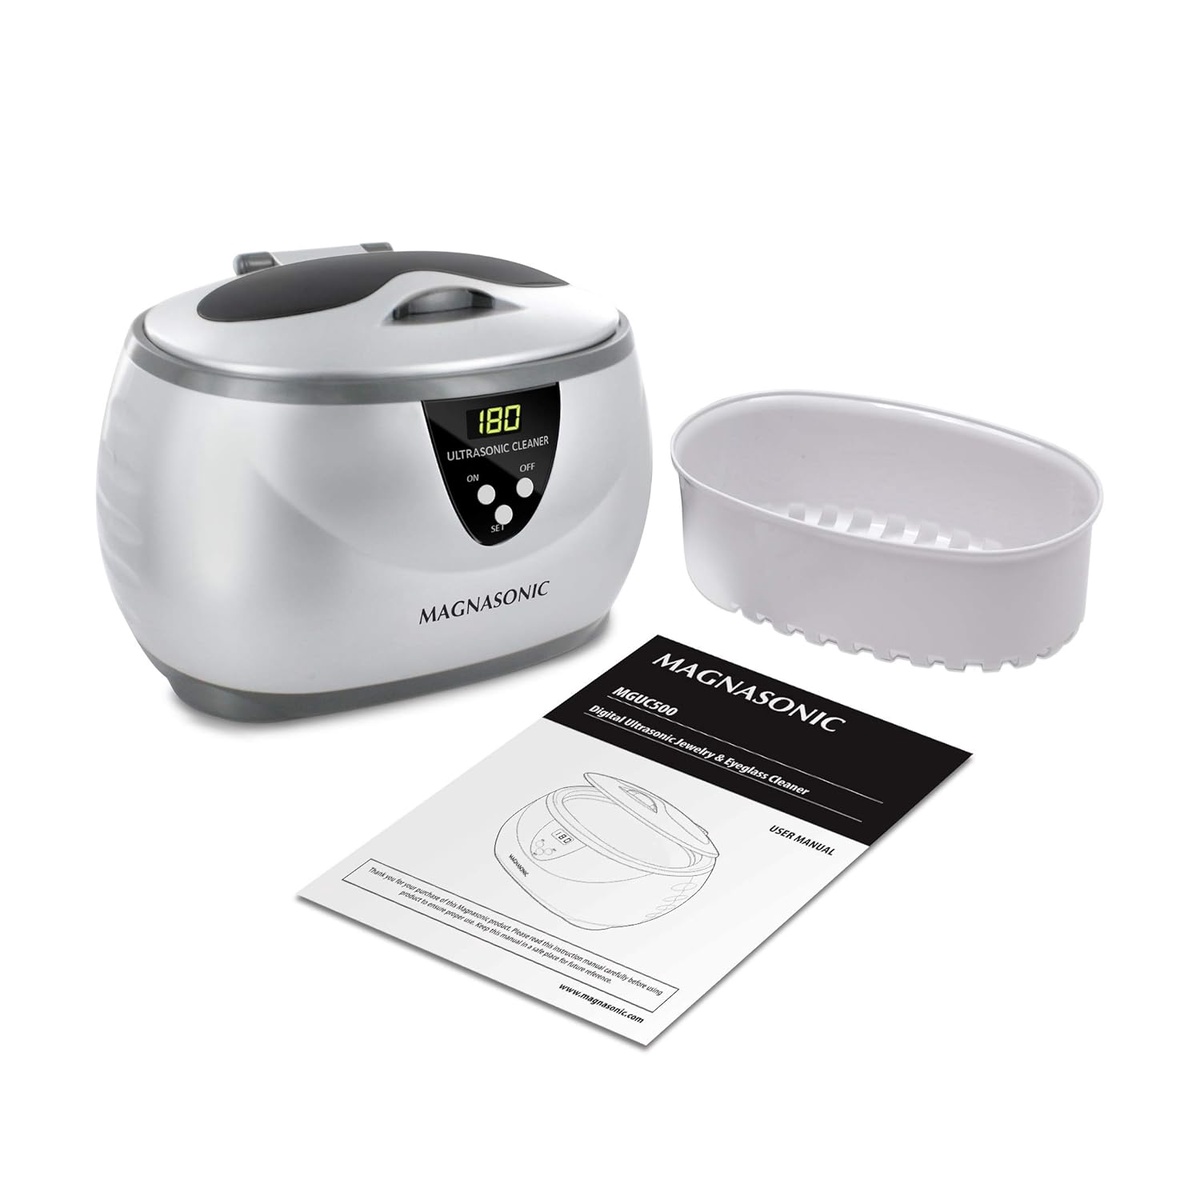 Magnasonic Professional Ultrasonic Jewelry Cleaner review!